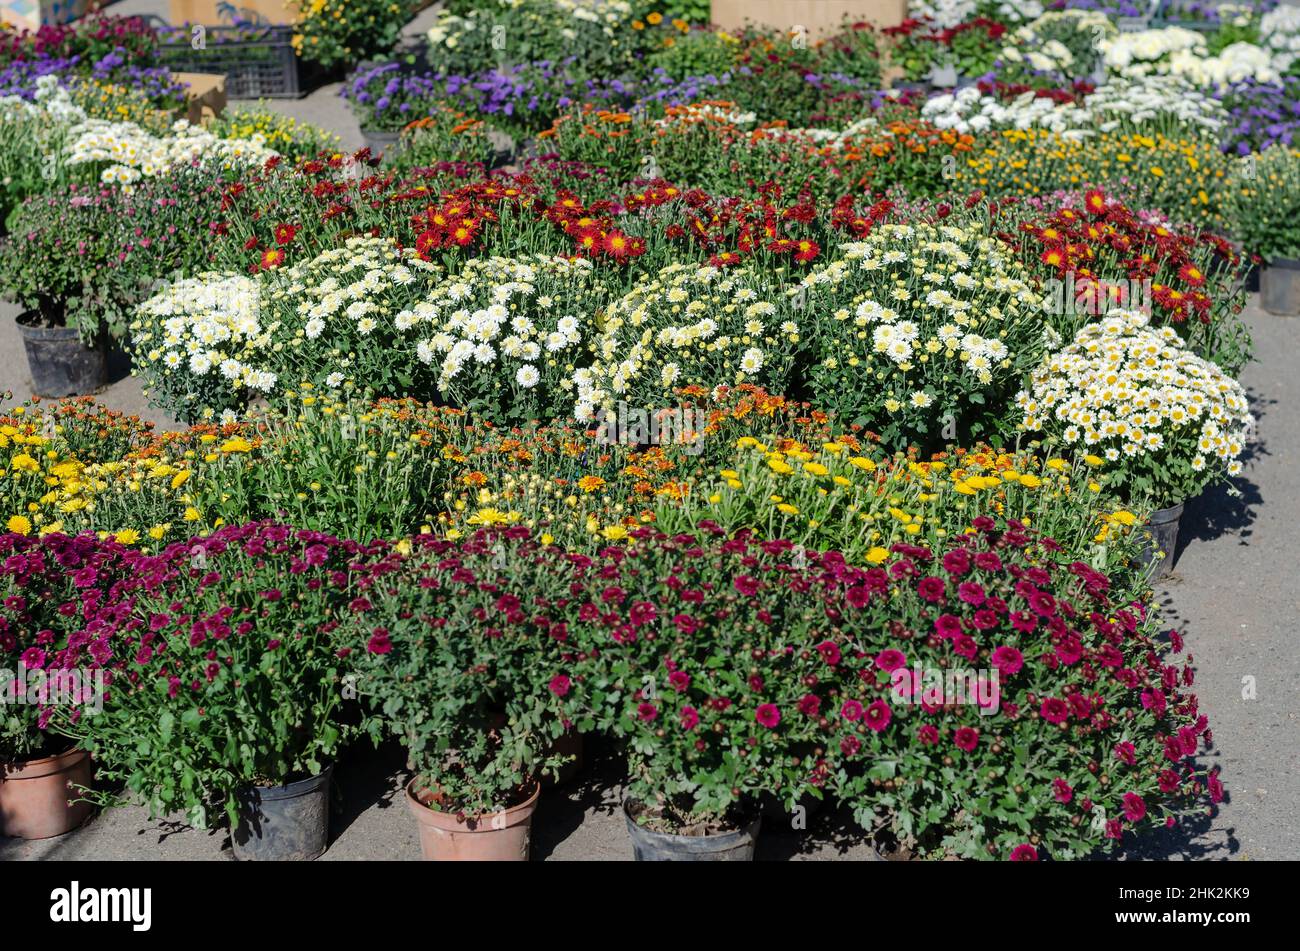 Farmer's Fair of gardening in the open air. Street trade. Variety of chrysanthemums in flower pots. Bushes of different varieties of beautiful ornamen Stock Photo